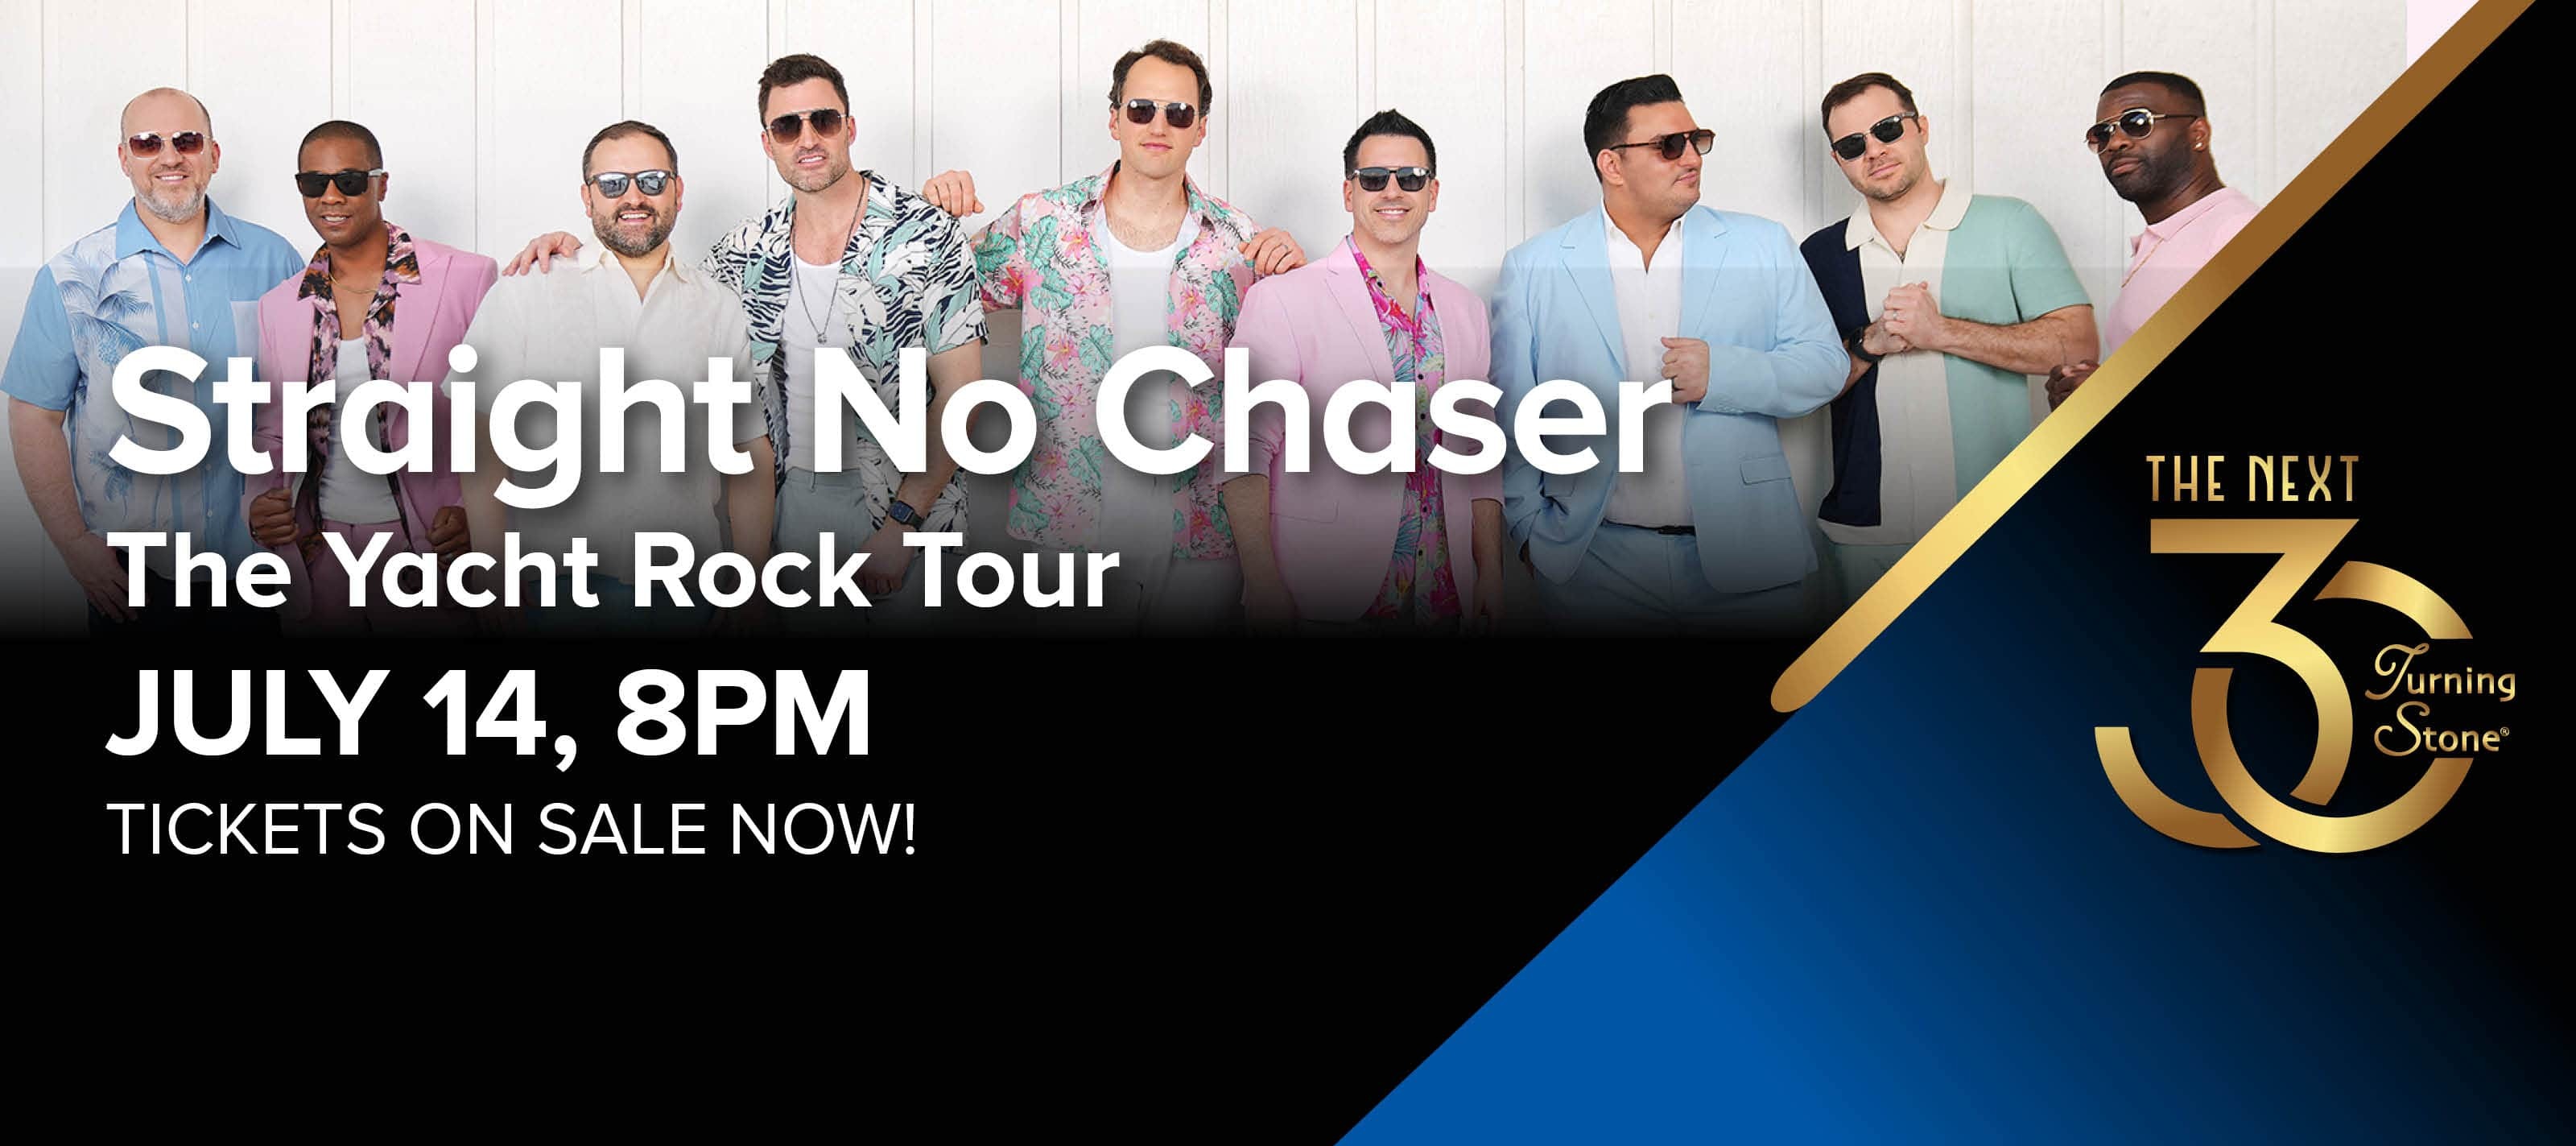 Straight No Chaser The Yacht Rock Tour July 14 8pm Tickets On Sale Now